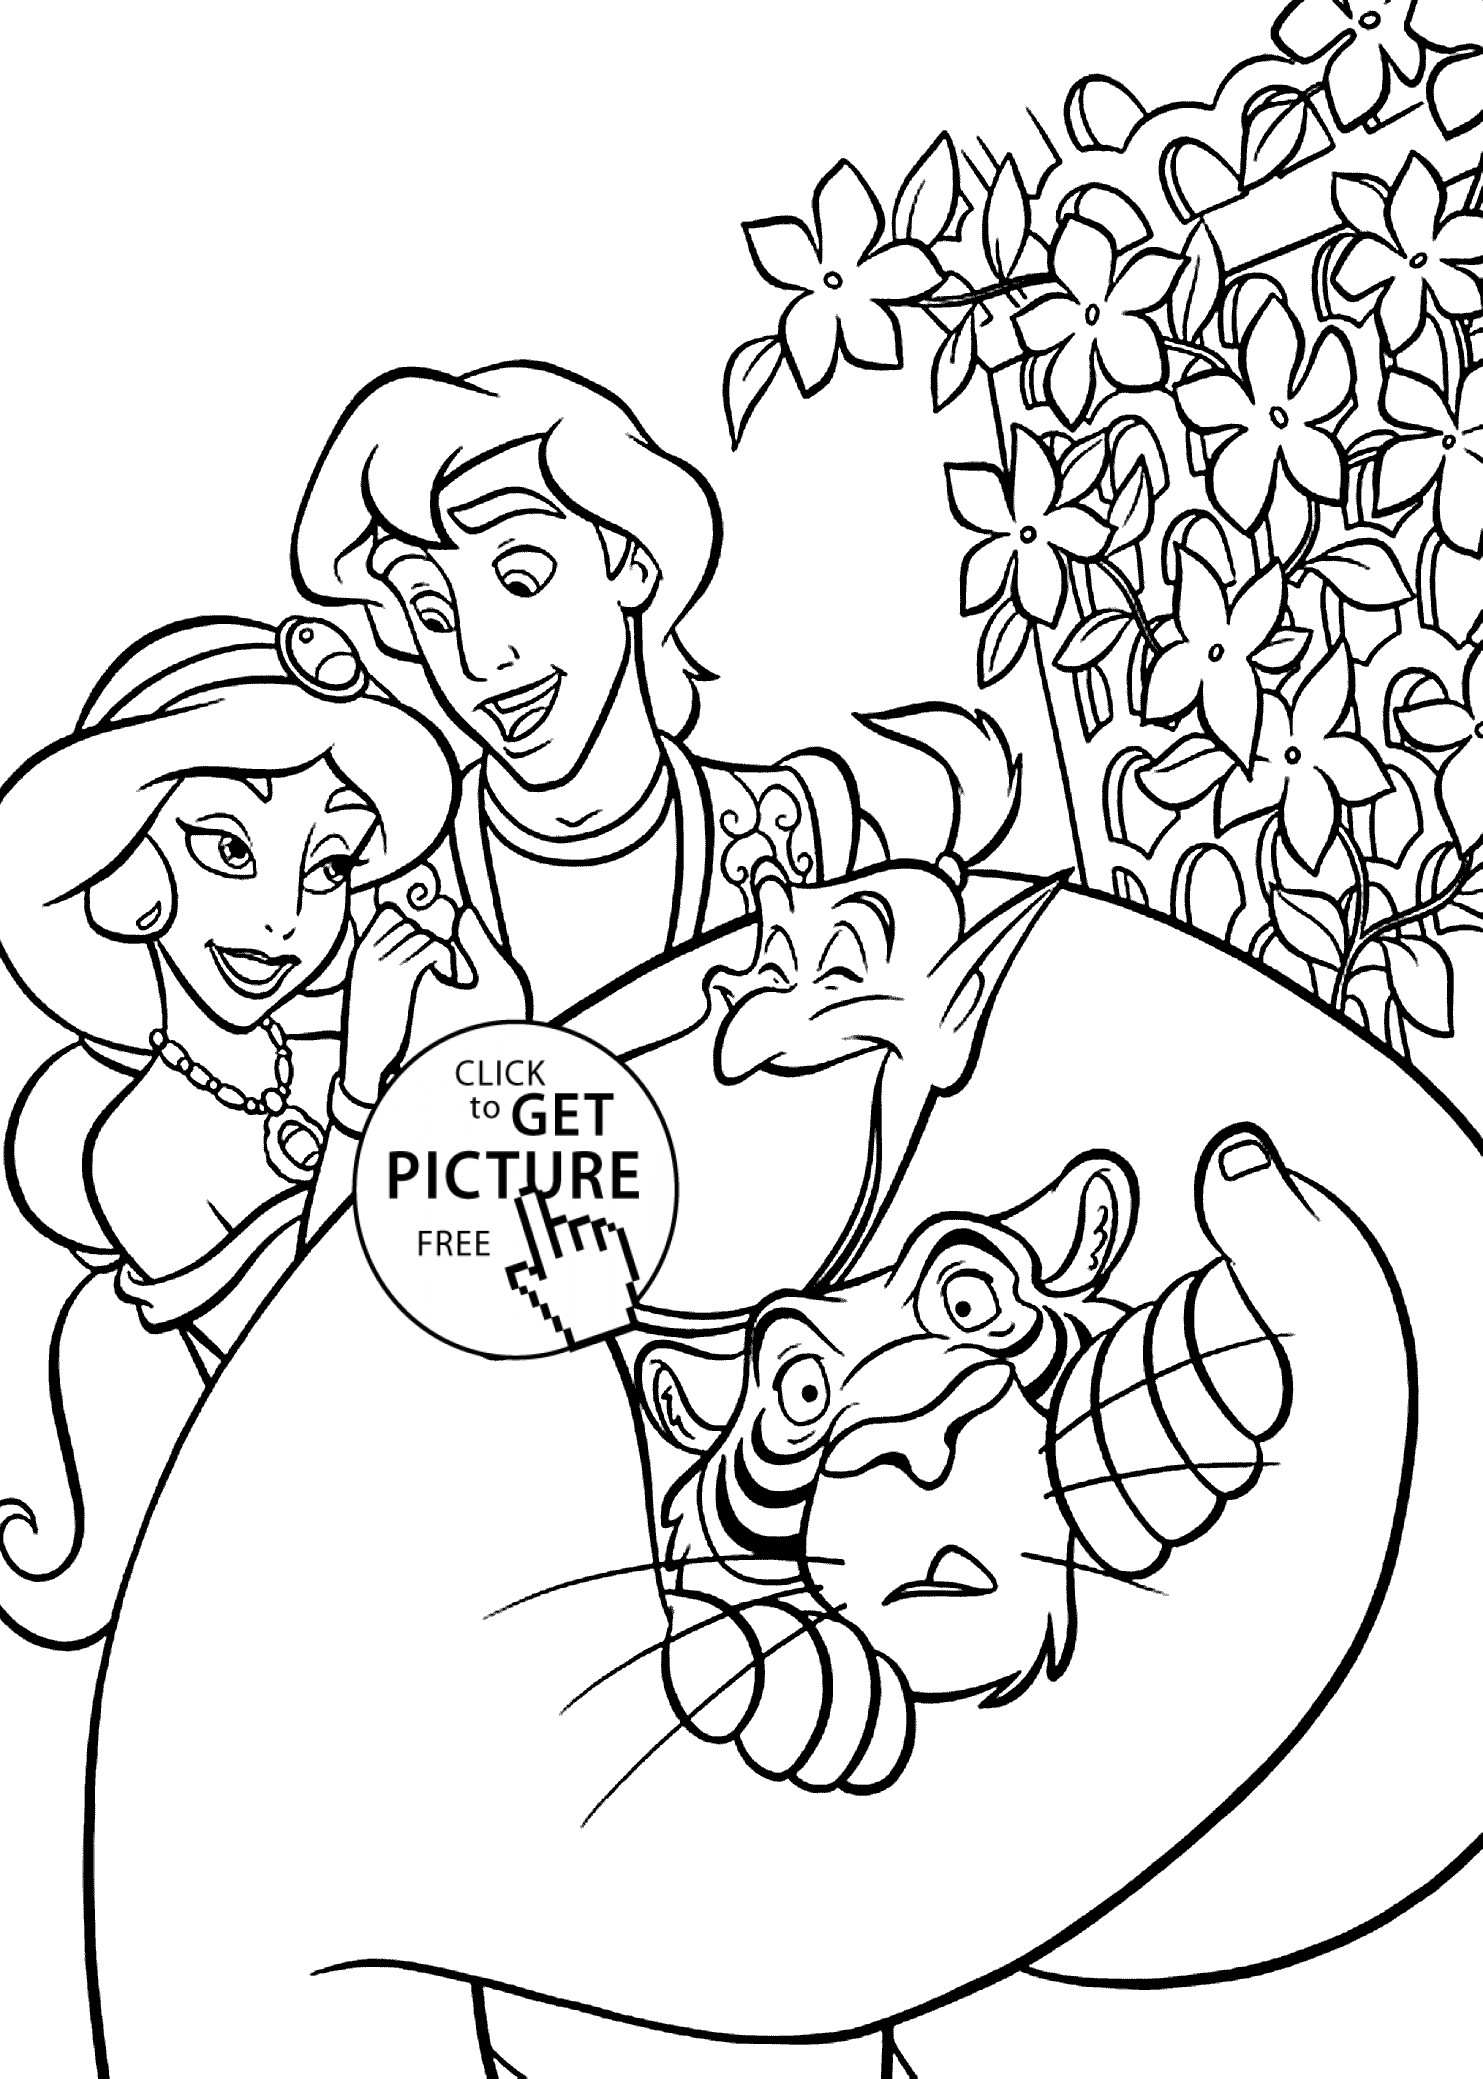 Coloring Sheets For Children
 All Aladdin cartoons coloring pages for kids printable